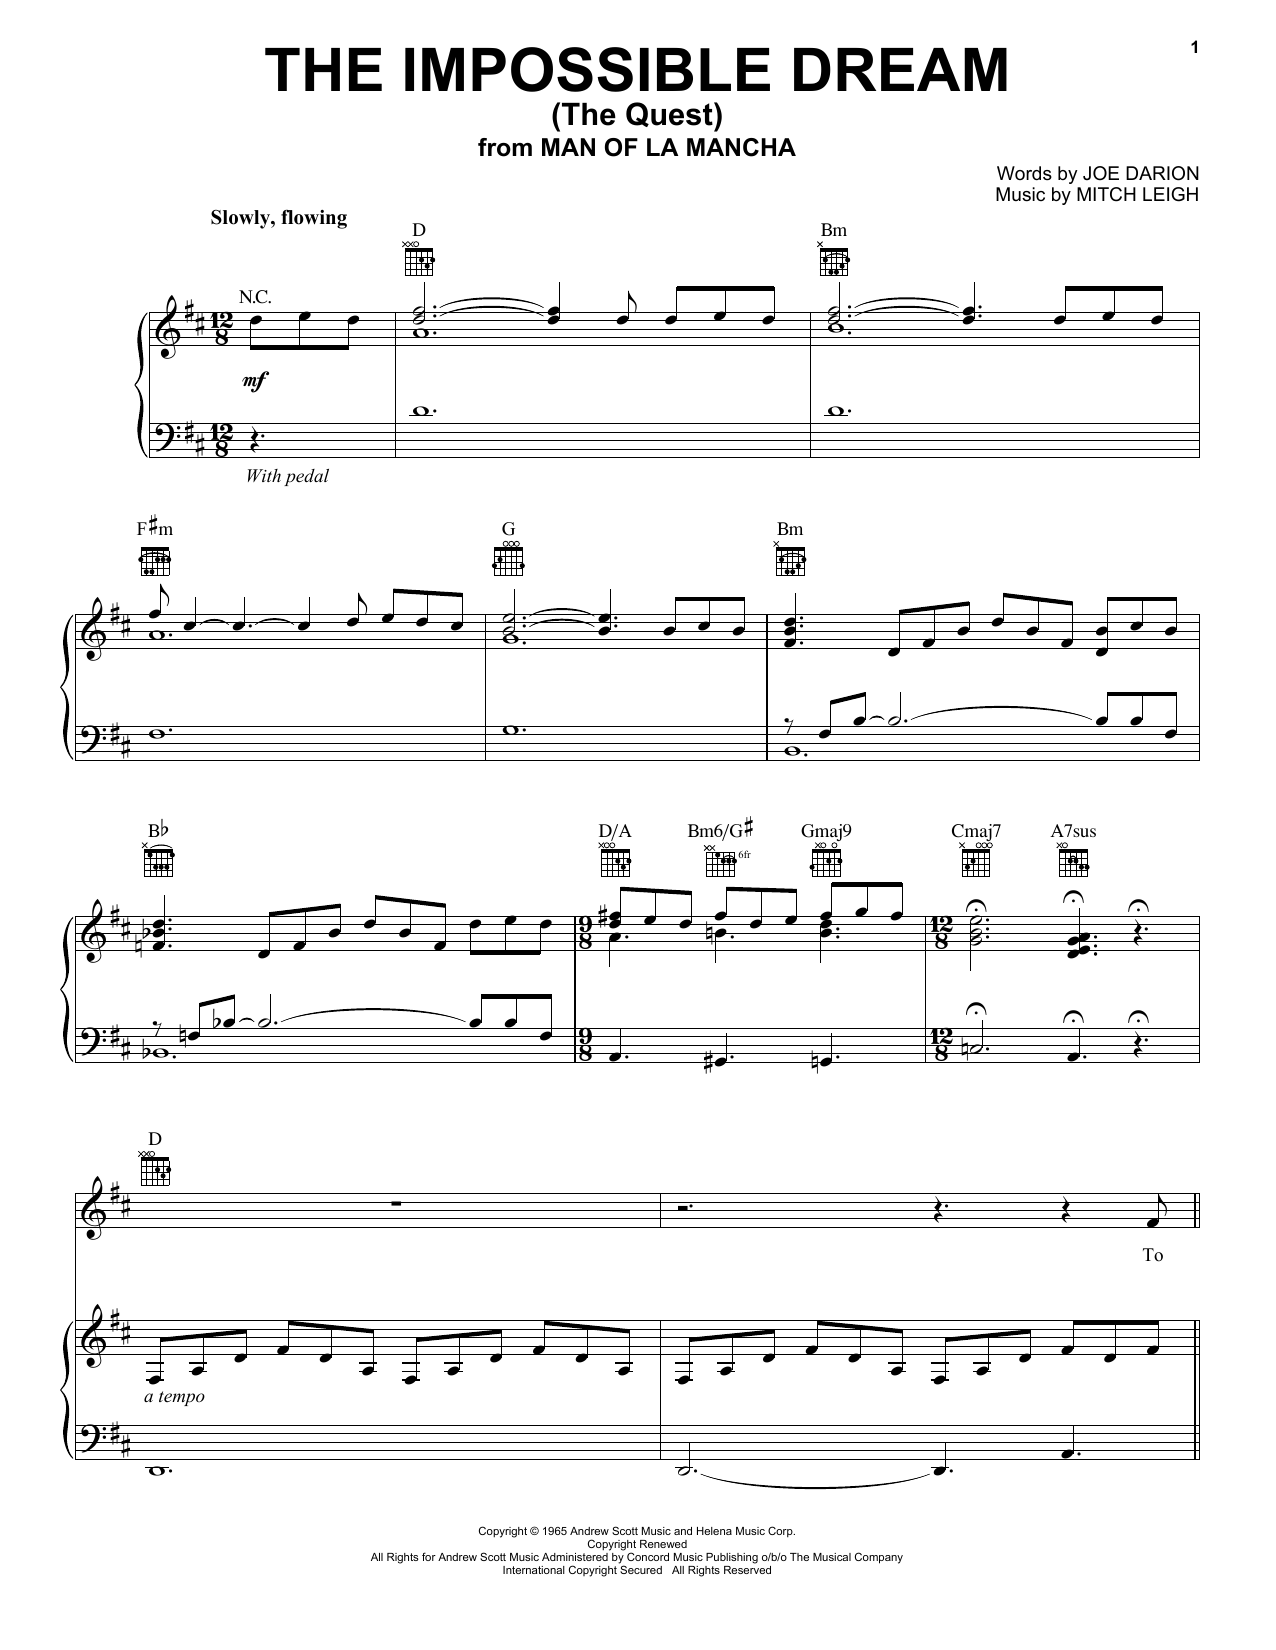 Download Luther Vandross The Impossible Dream (The Quest) Sheet Music